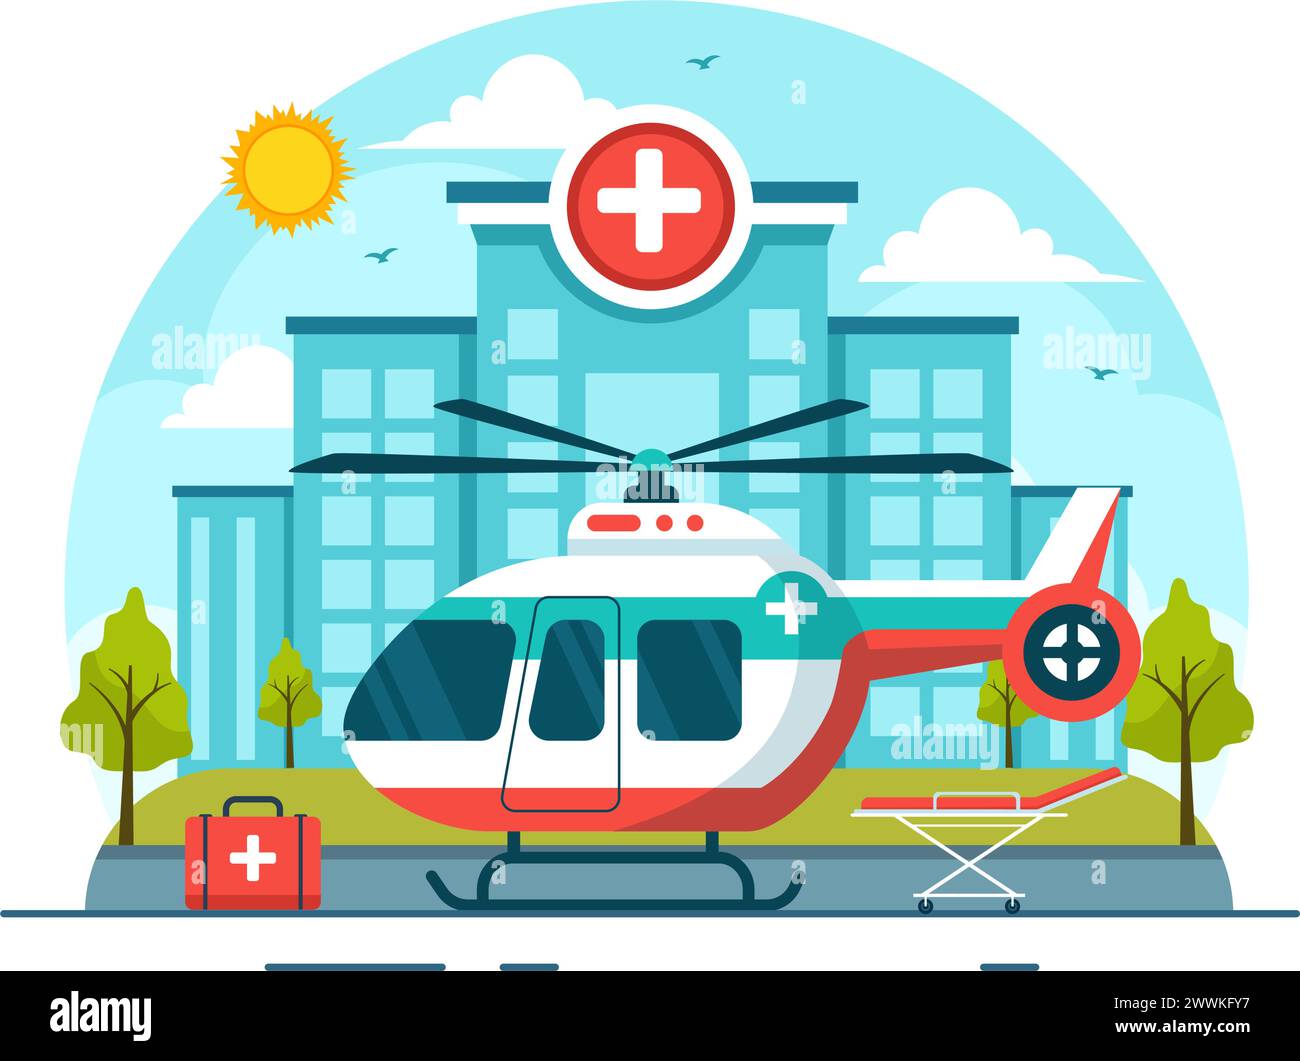 Medical Vehicle Ambulance Car or Emergency Service Vector Illustration for Pick Up Patient the Injured in an Accident in Flat Cartoon Background Stock Vector